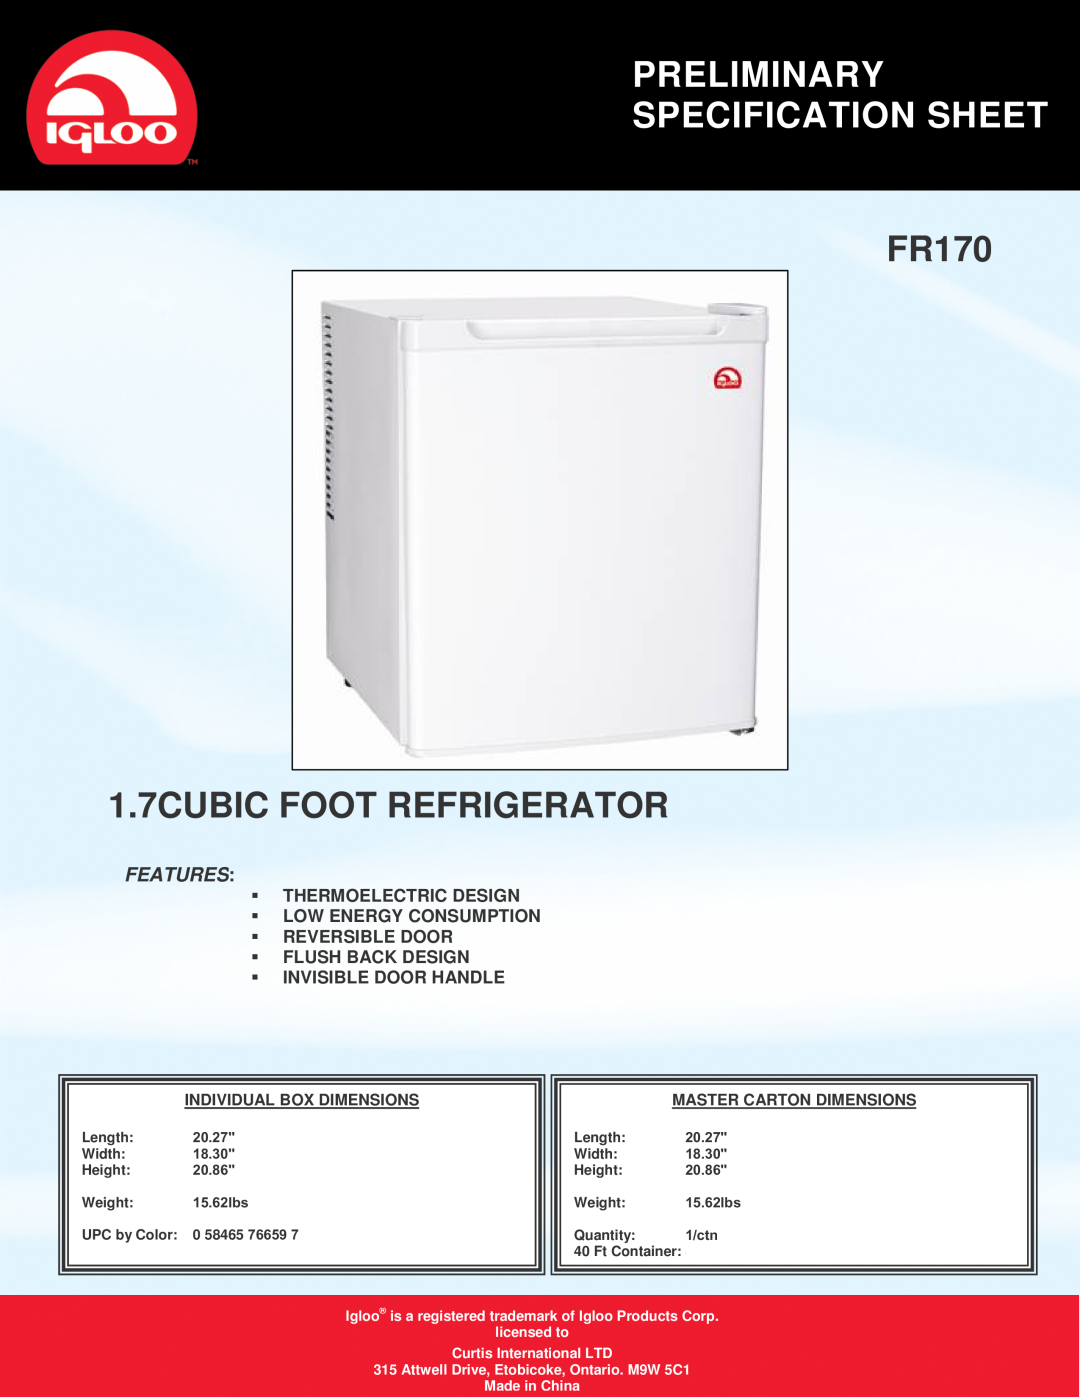 Igloo specifications Preliminary Specification Sheet, FR170 1.7CUBIC FOOT REFRIGERATOR, Features, Invisible Door Handle 